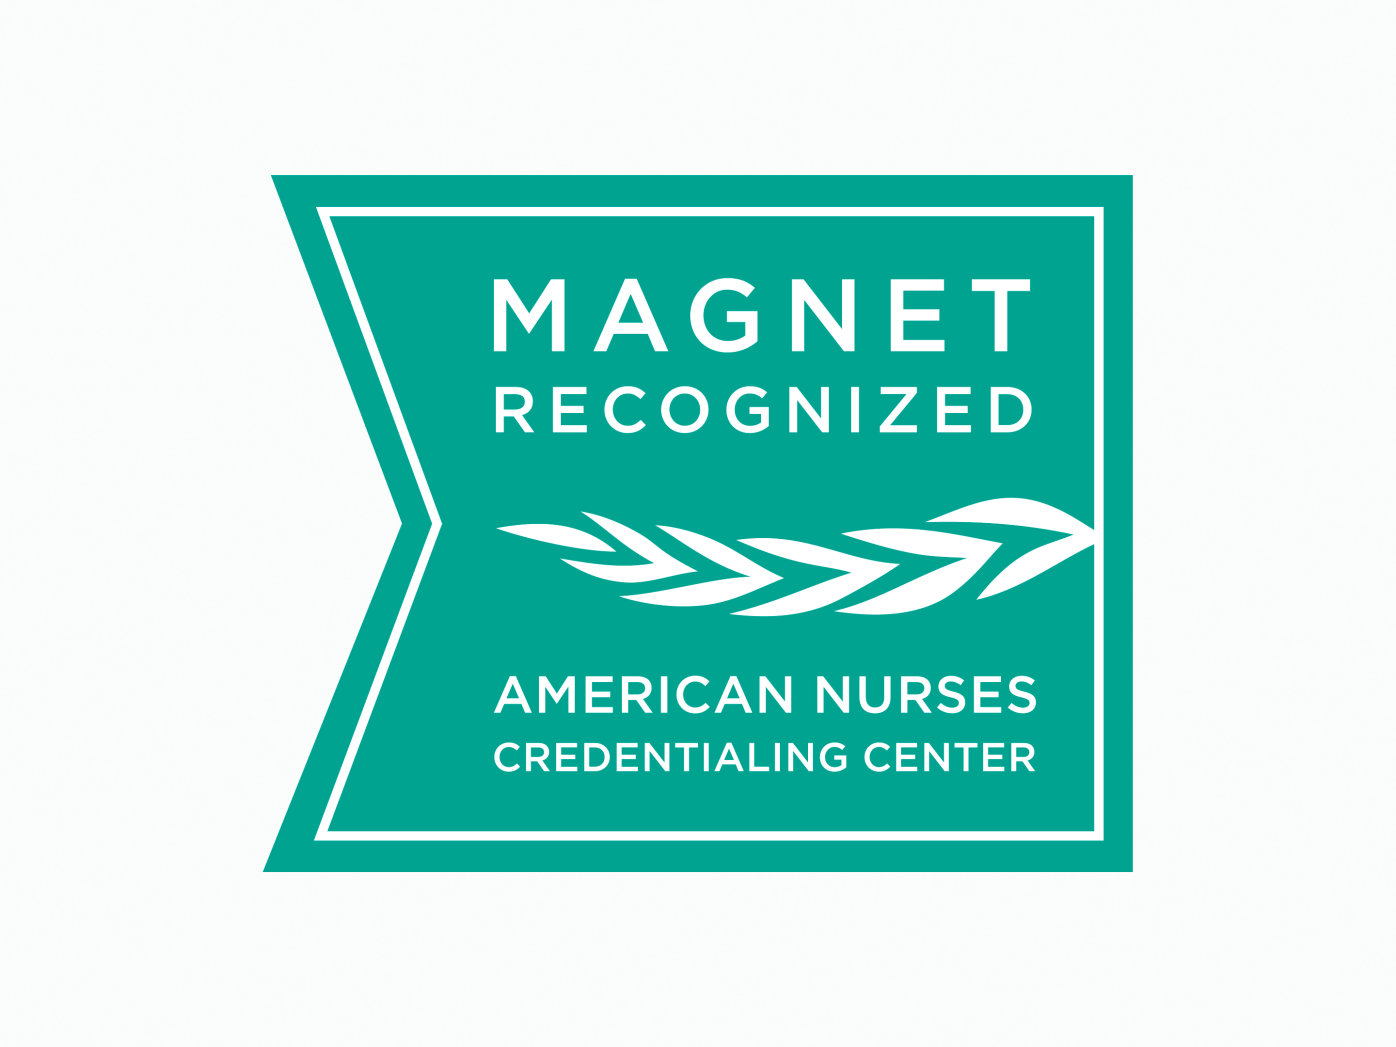 Magnet recognition seal from America Nurses Credentialing Center